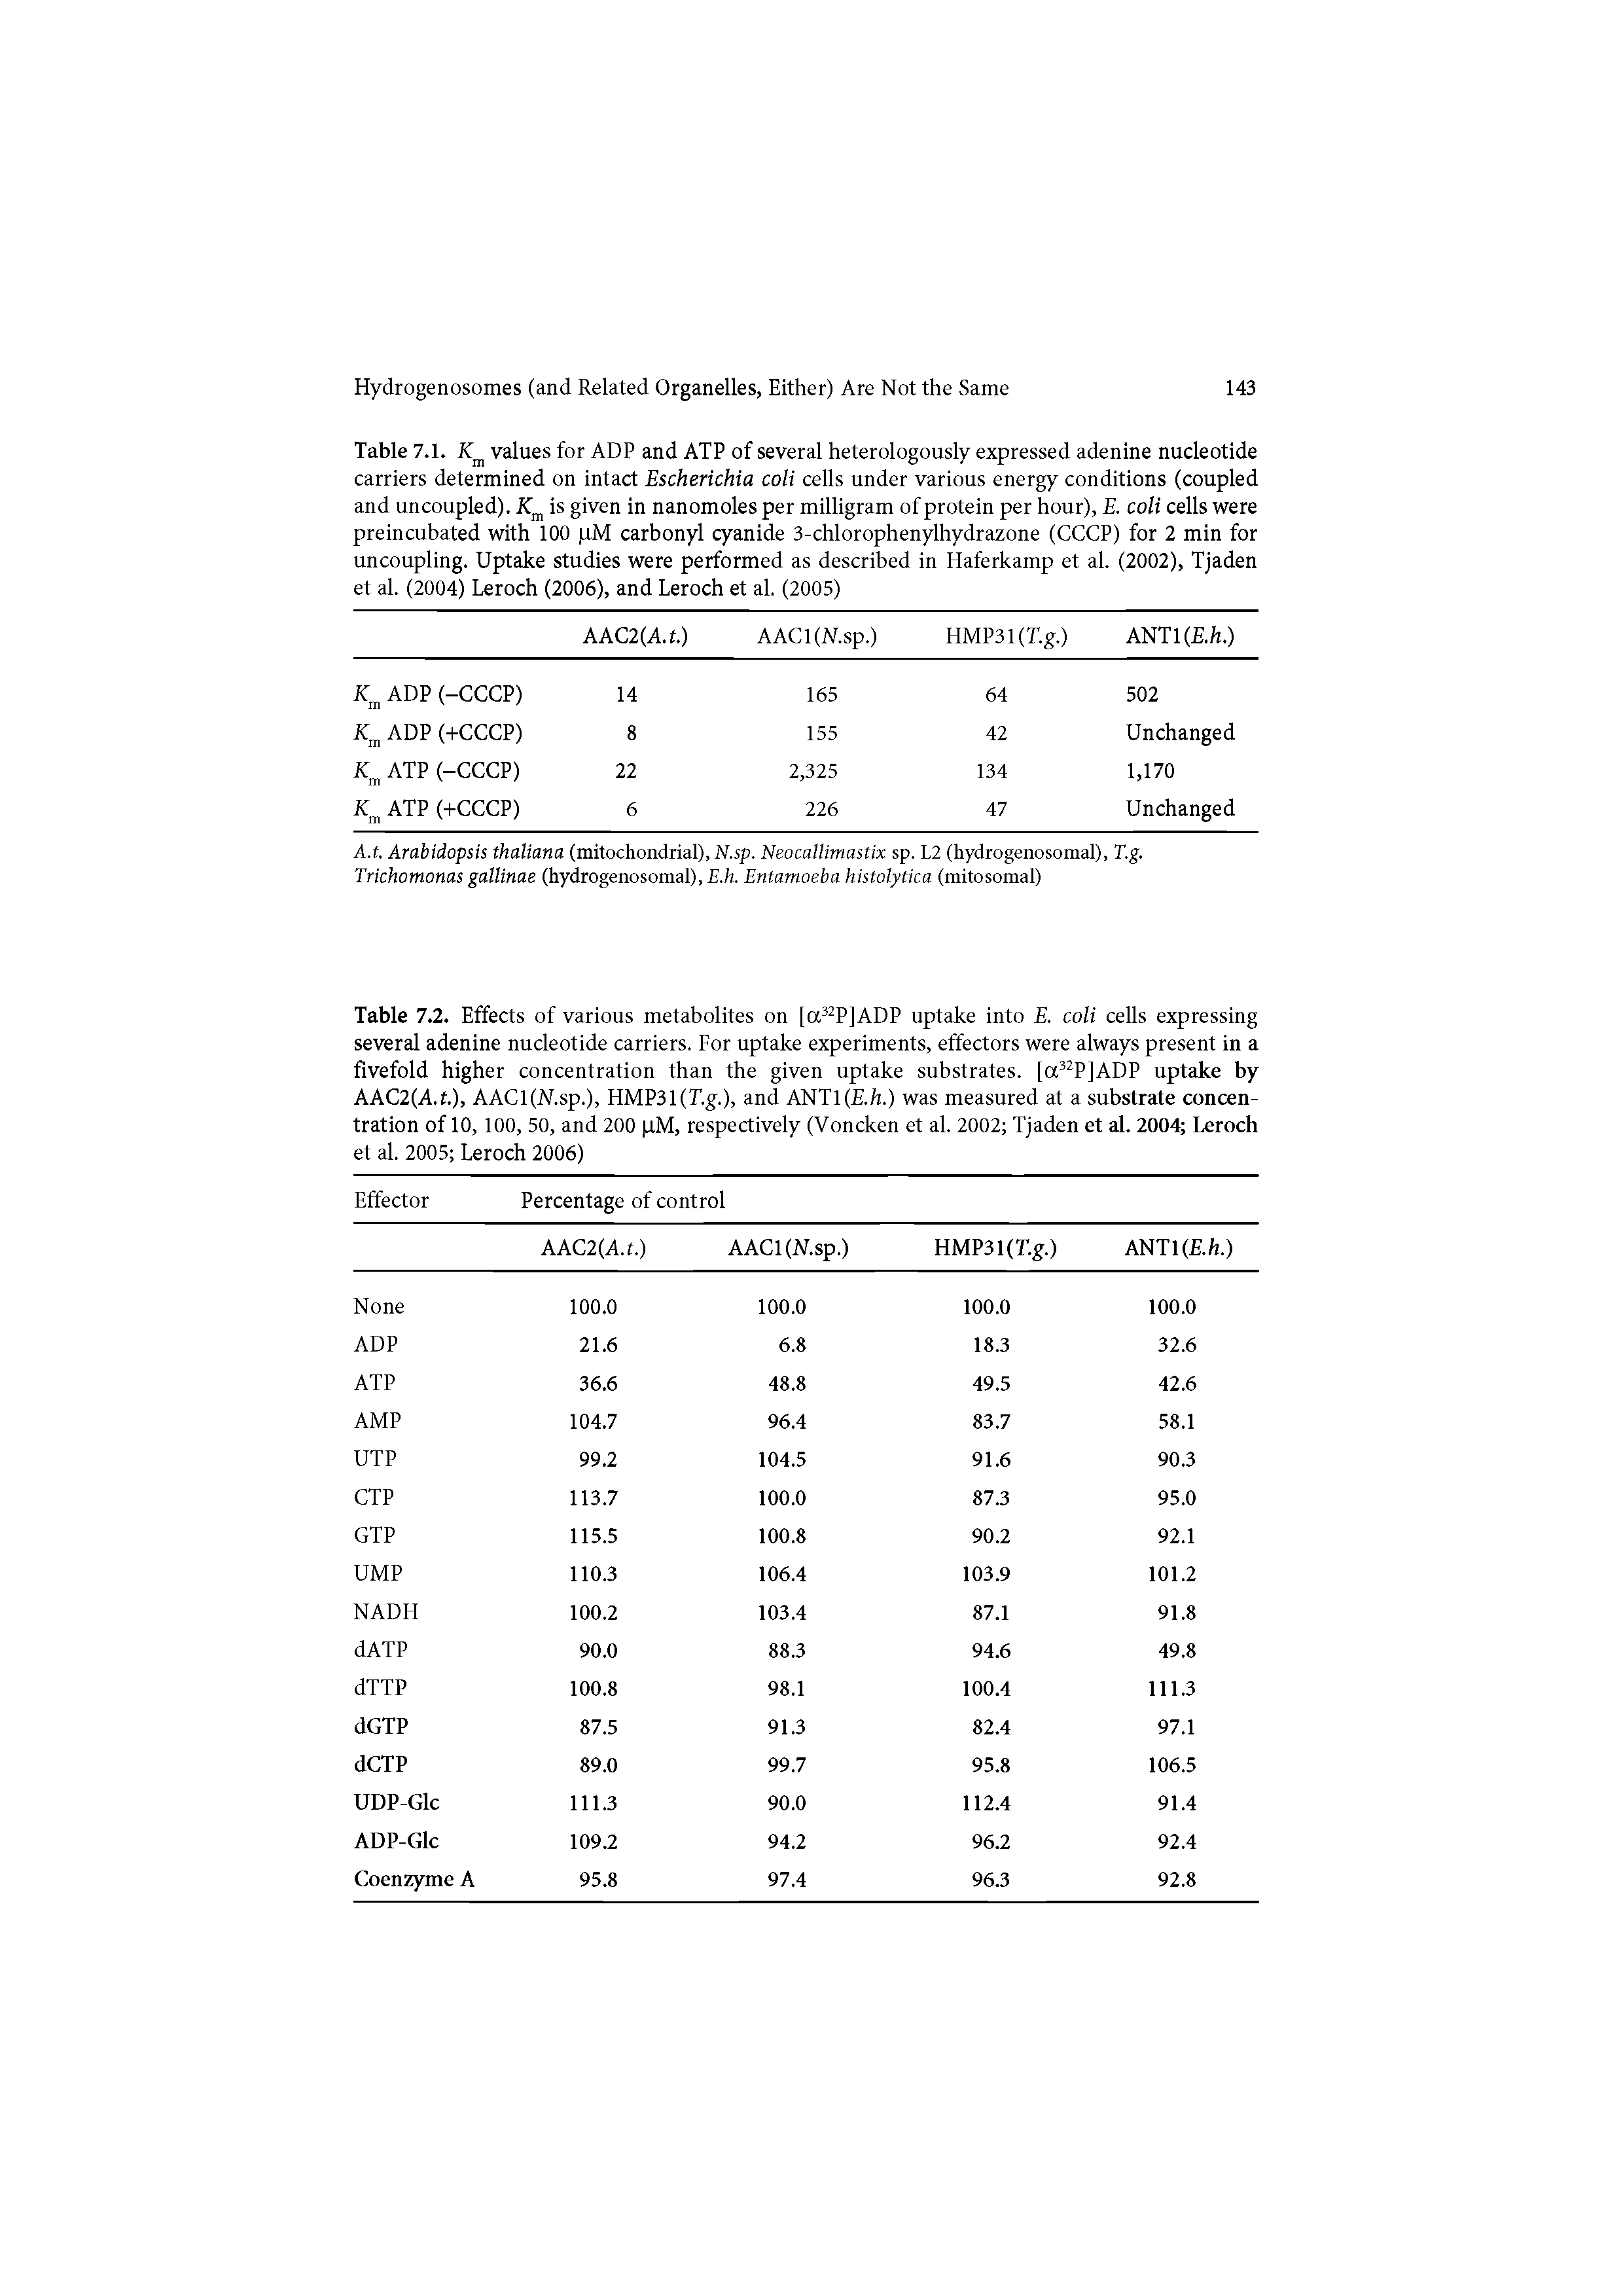 Table 7.2. Effects of various metabolites on [a32P]ADP uptake into E. coli cells expressing several adenine nucleotide carriers. For uptake experiments, effectors were always present in a fivefold higher concentration than the given uptake substrates. [a32P]ADP uptake by AAC2(A.t.), AACl(N.sp.), HMP31(T.g.), and ANTl( ./z.) was measured at a substrate concentration of 10, 100, 50, and 200 pM, respectively (Voncken et al. 2002 Tjaden et al. 2004 Leroch et al. 2005 Leroch 2006) ...